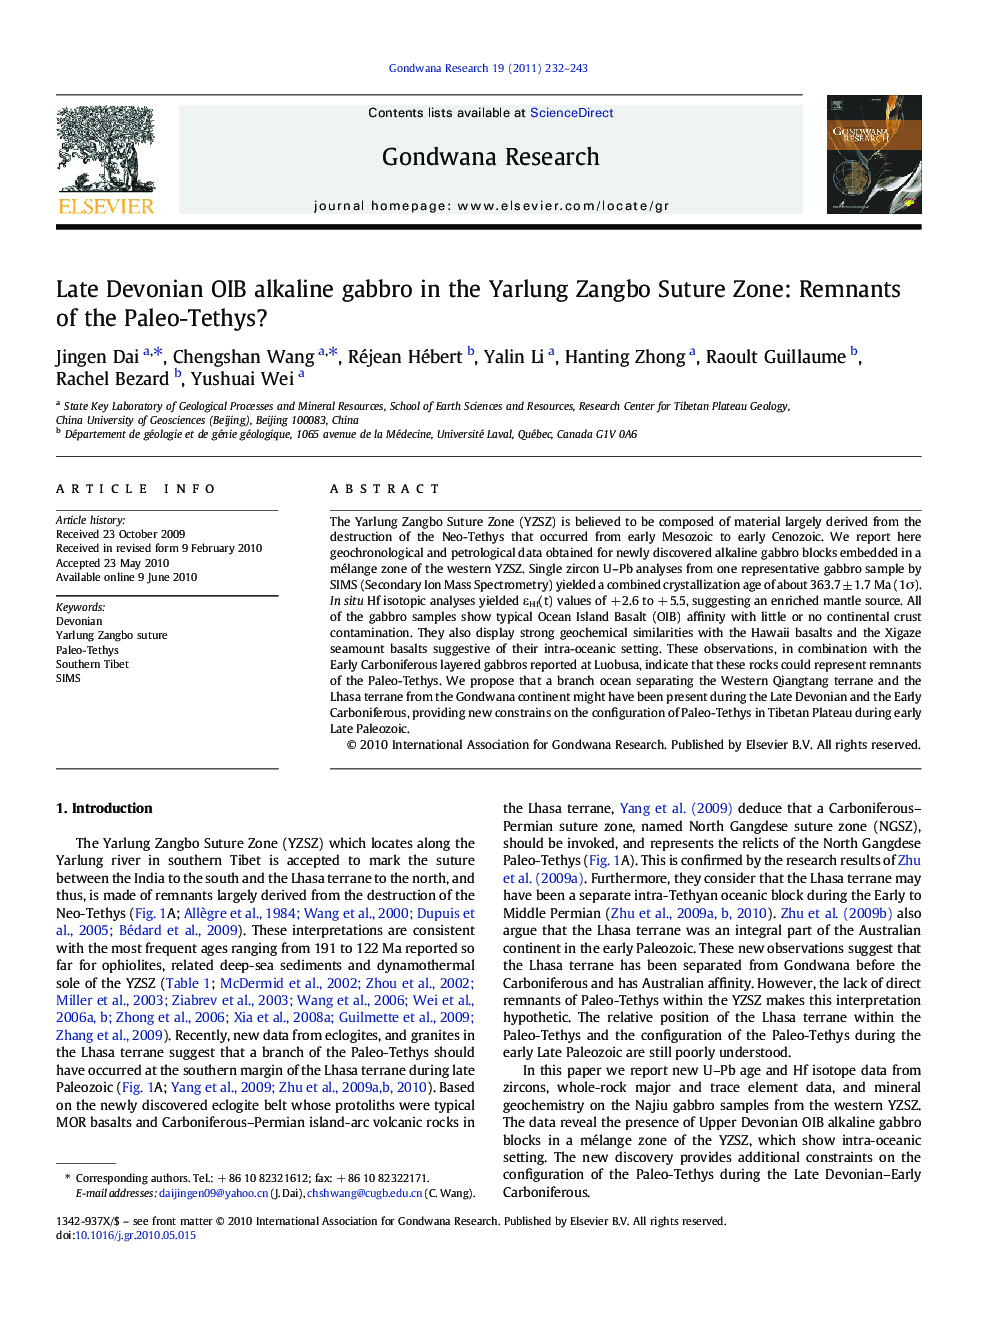 Late Devonian OIB alkaline gabbro in the Yarlung Zangbo Suture Zone: Remnants of the Paleo-Tethys?